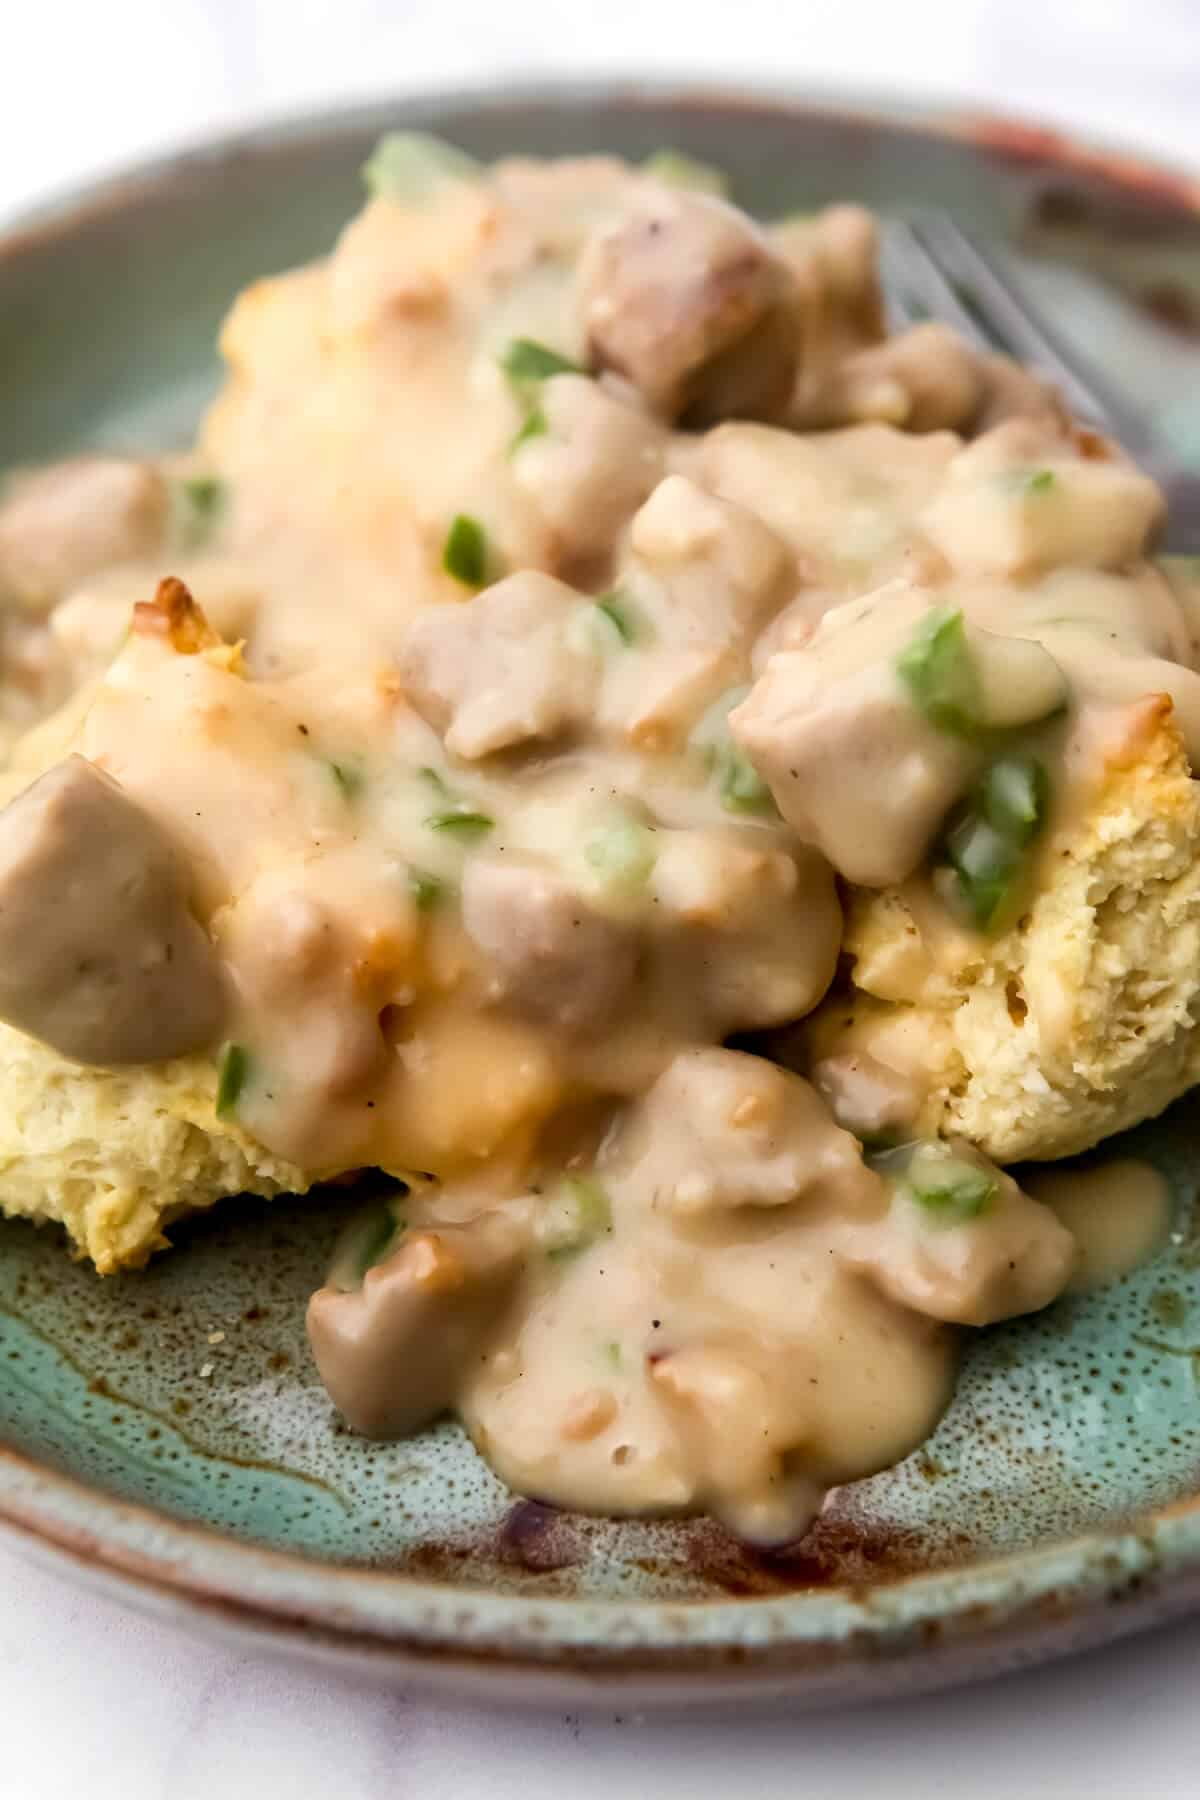 A close up of a plate of vegan biscuits and gravy.